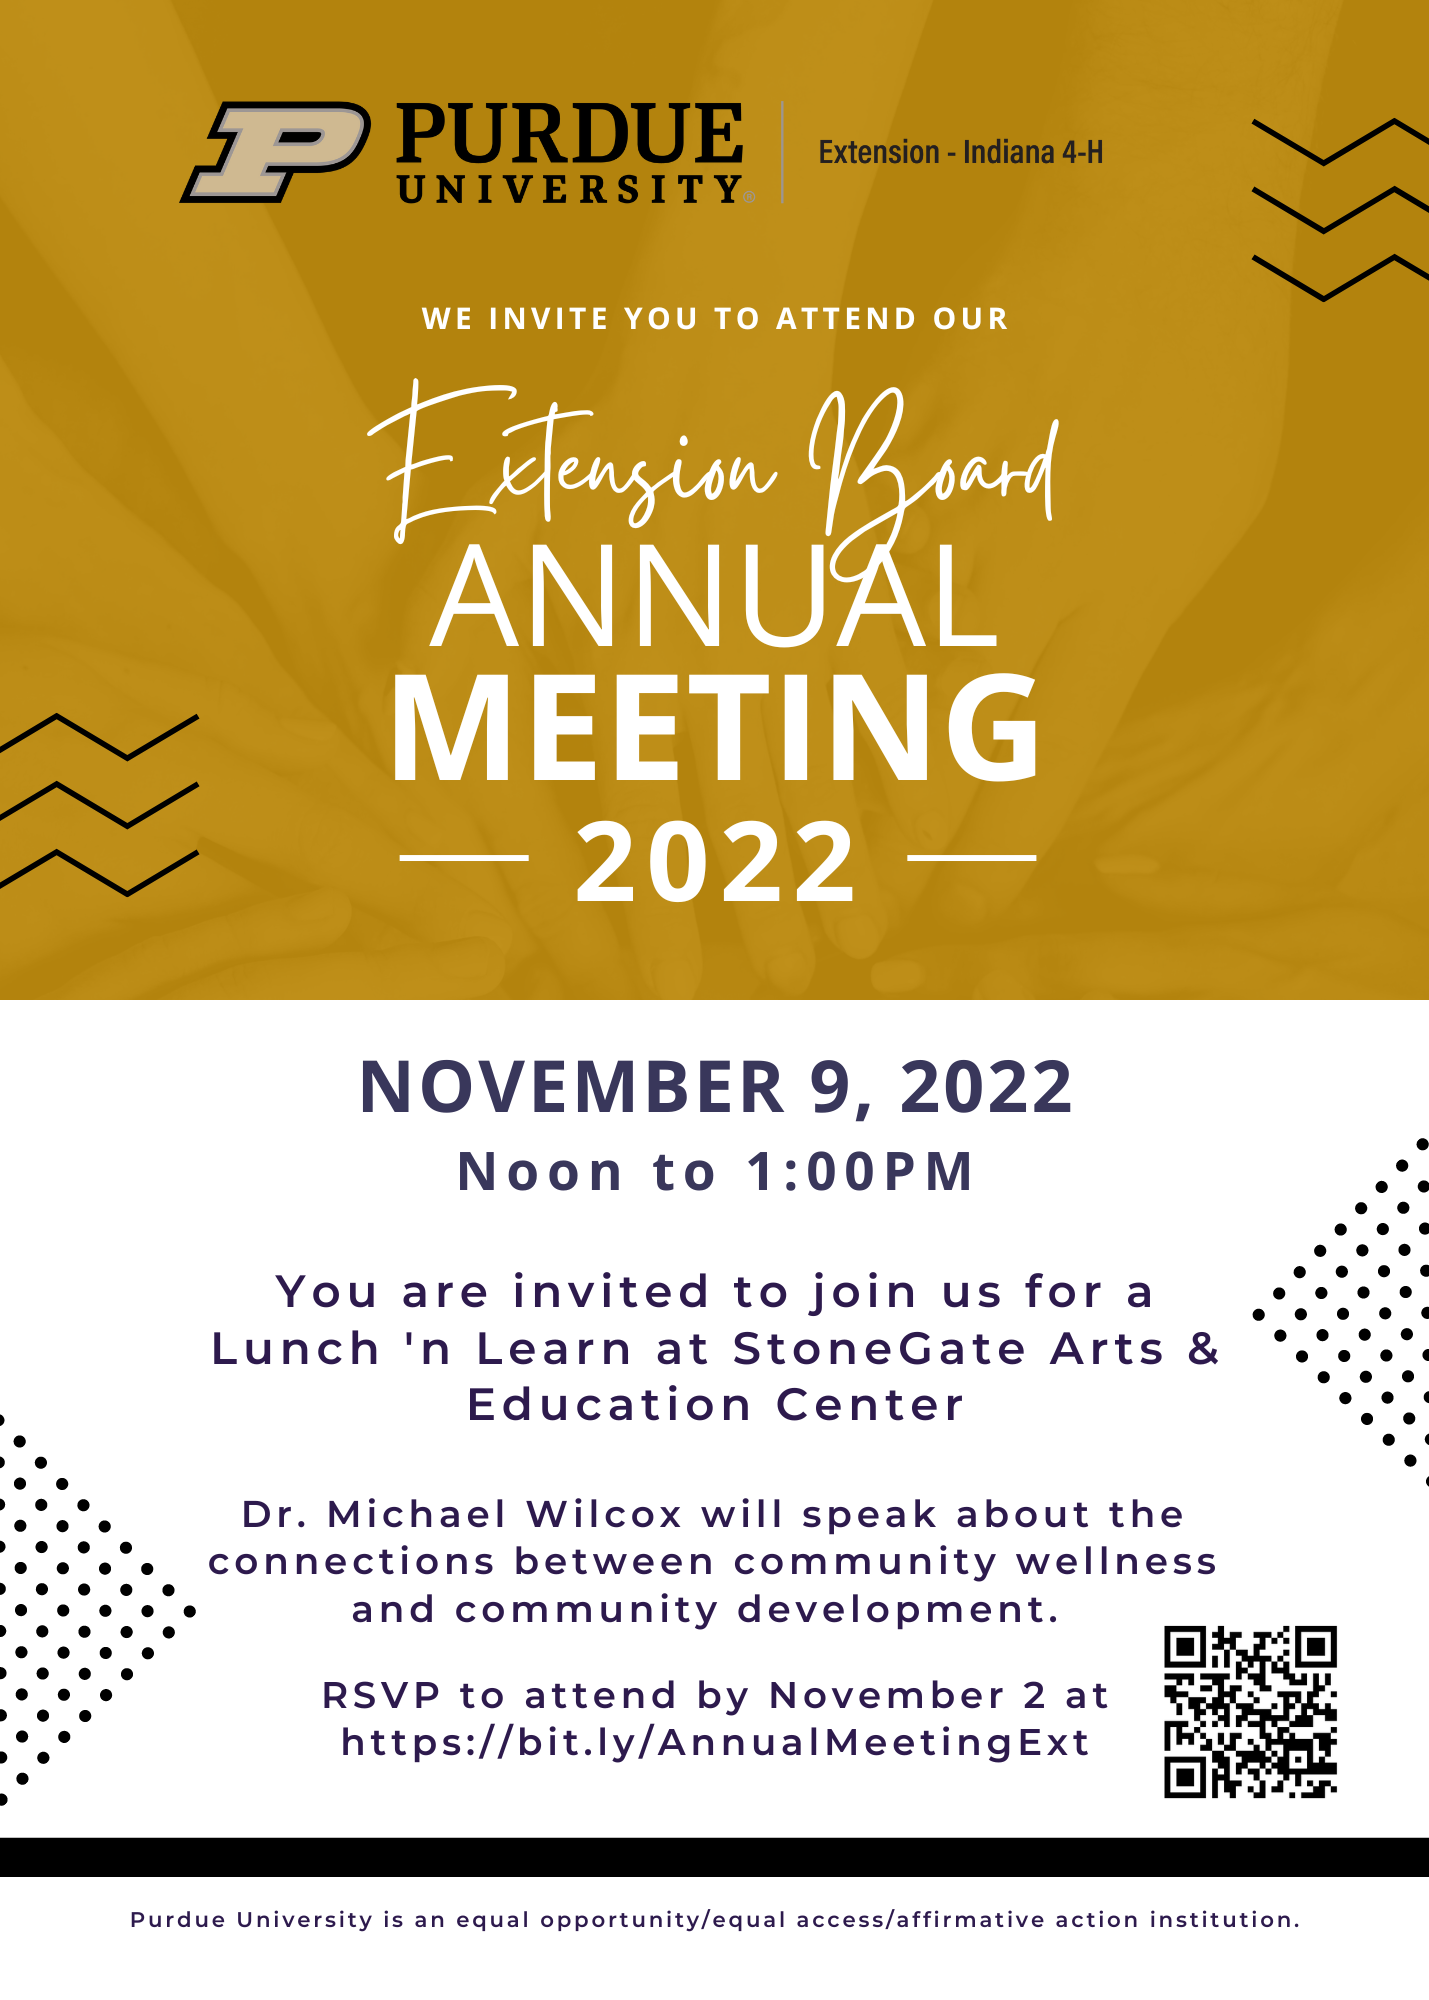 ext-bd-2022-annual-meeting-flyer.png